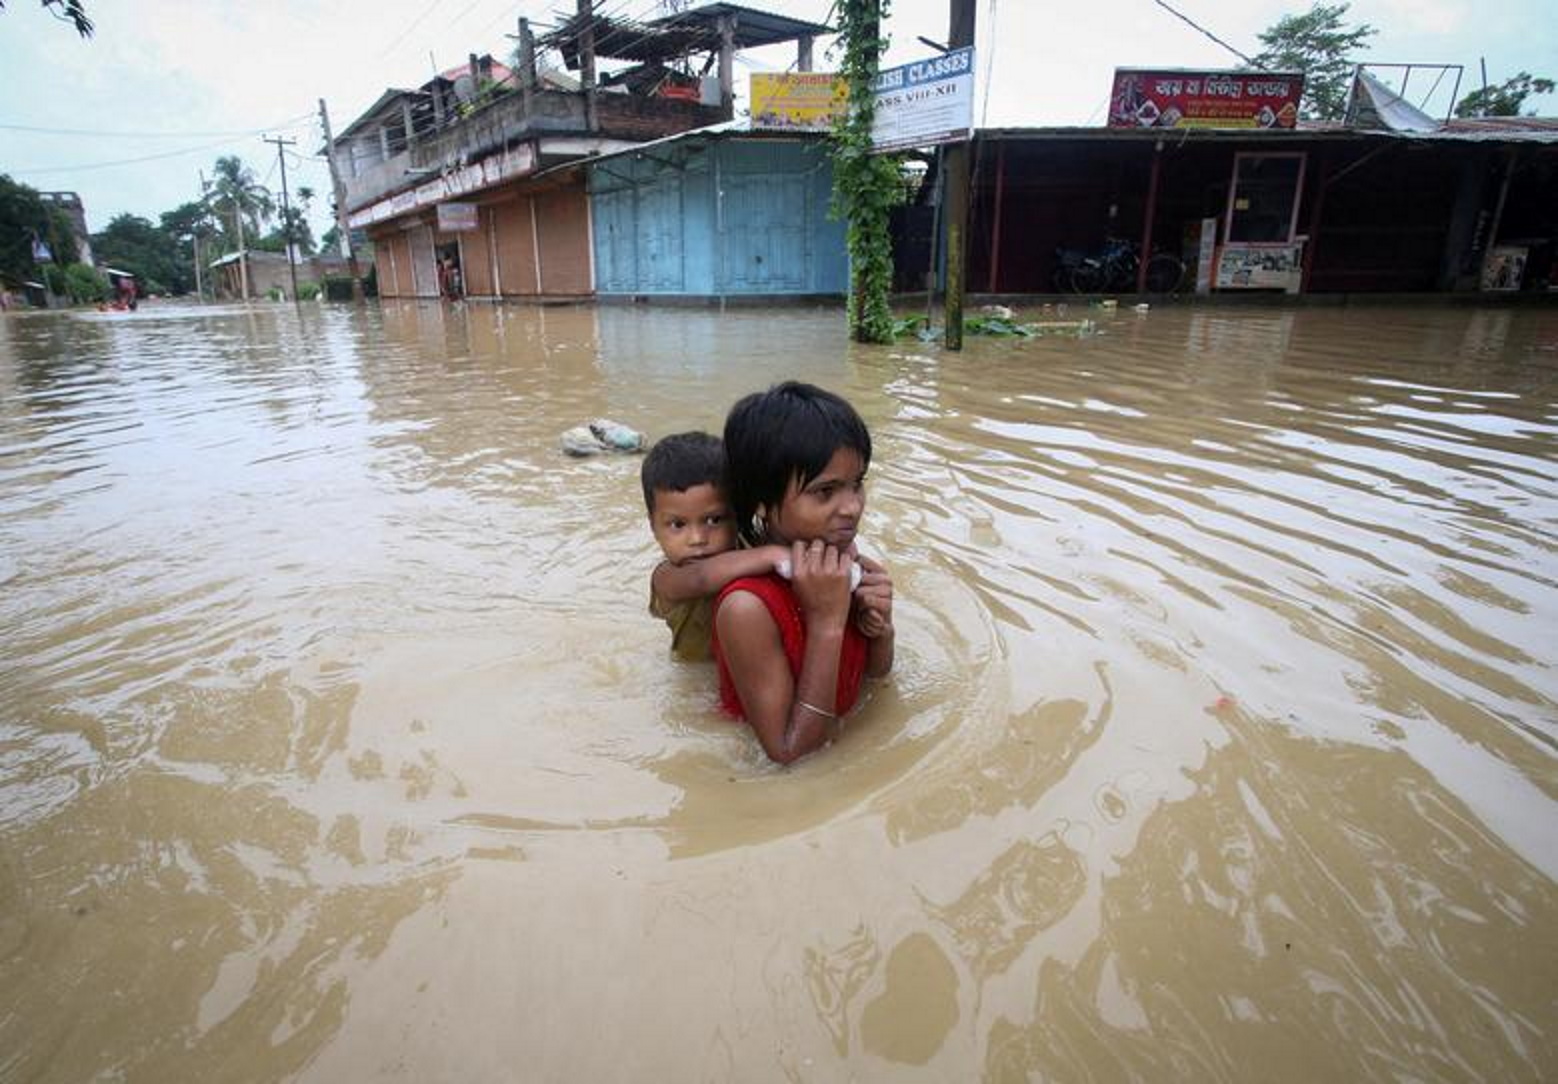 A girl carries her brother as she wades through a flooded road after heavy rains, on the outskirts of Agartala, India, 18 June 2022. Photo: Jayanta Dey / REUTERS